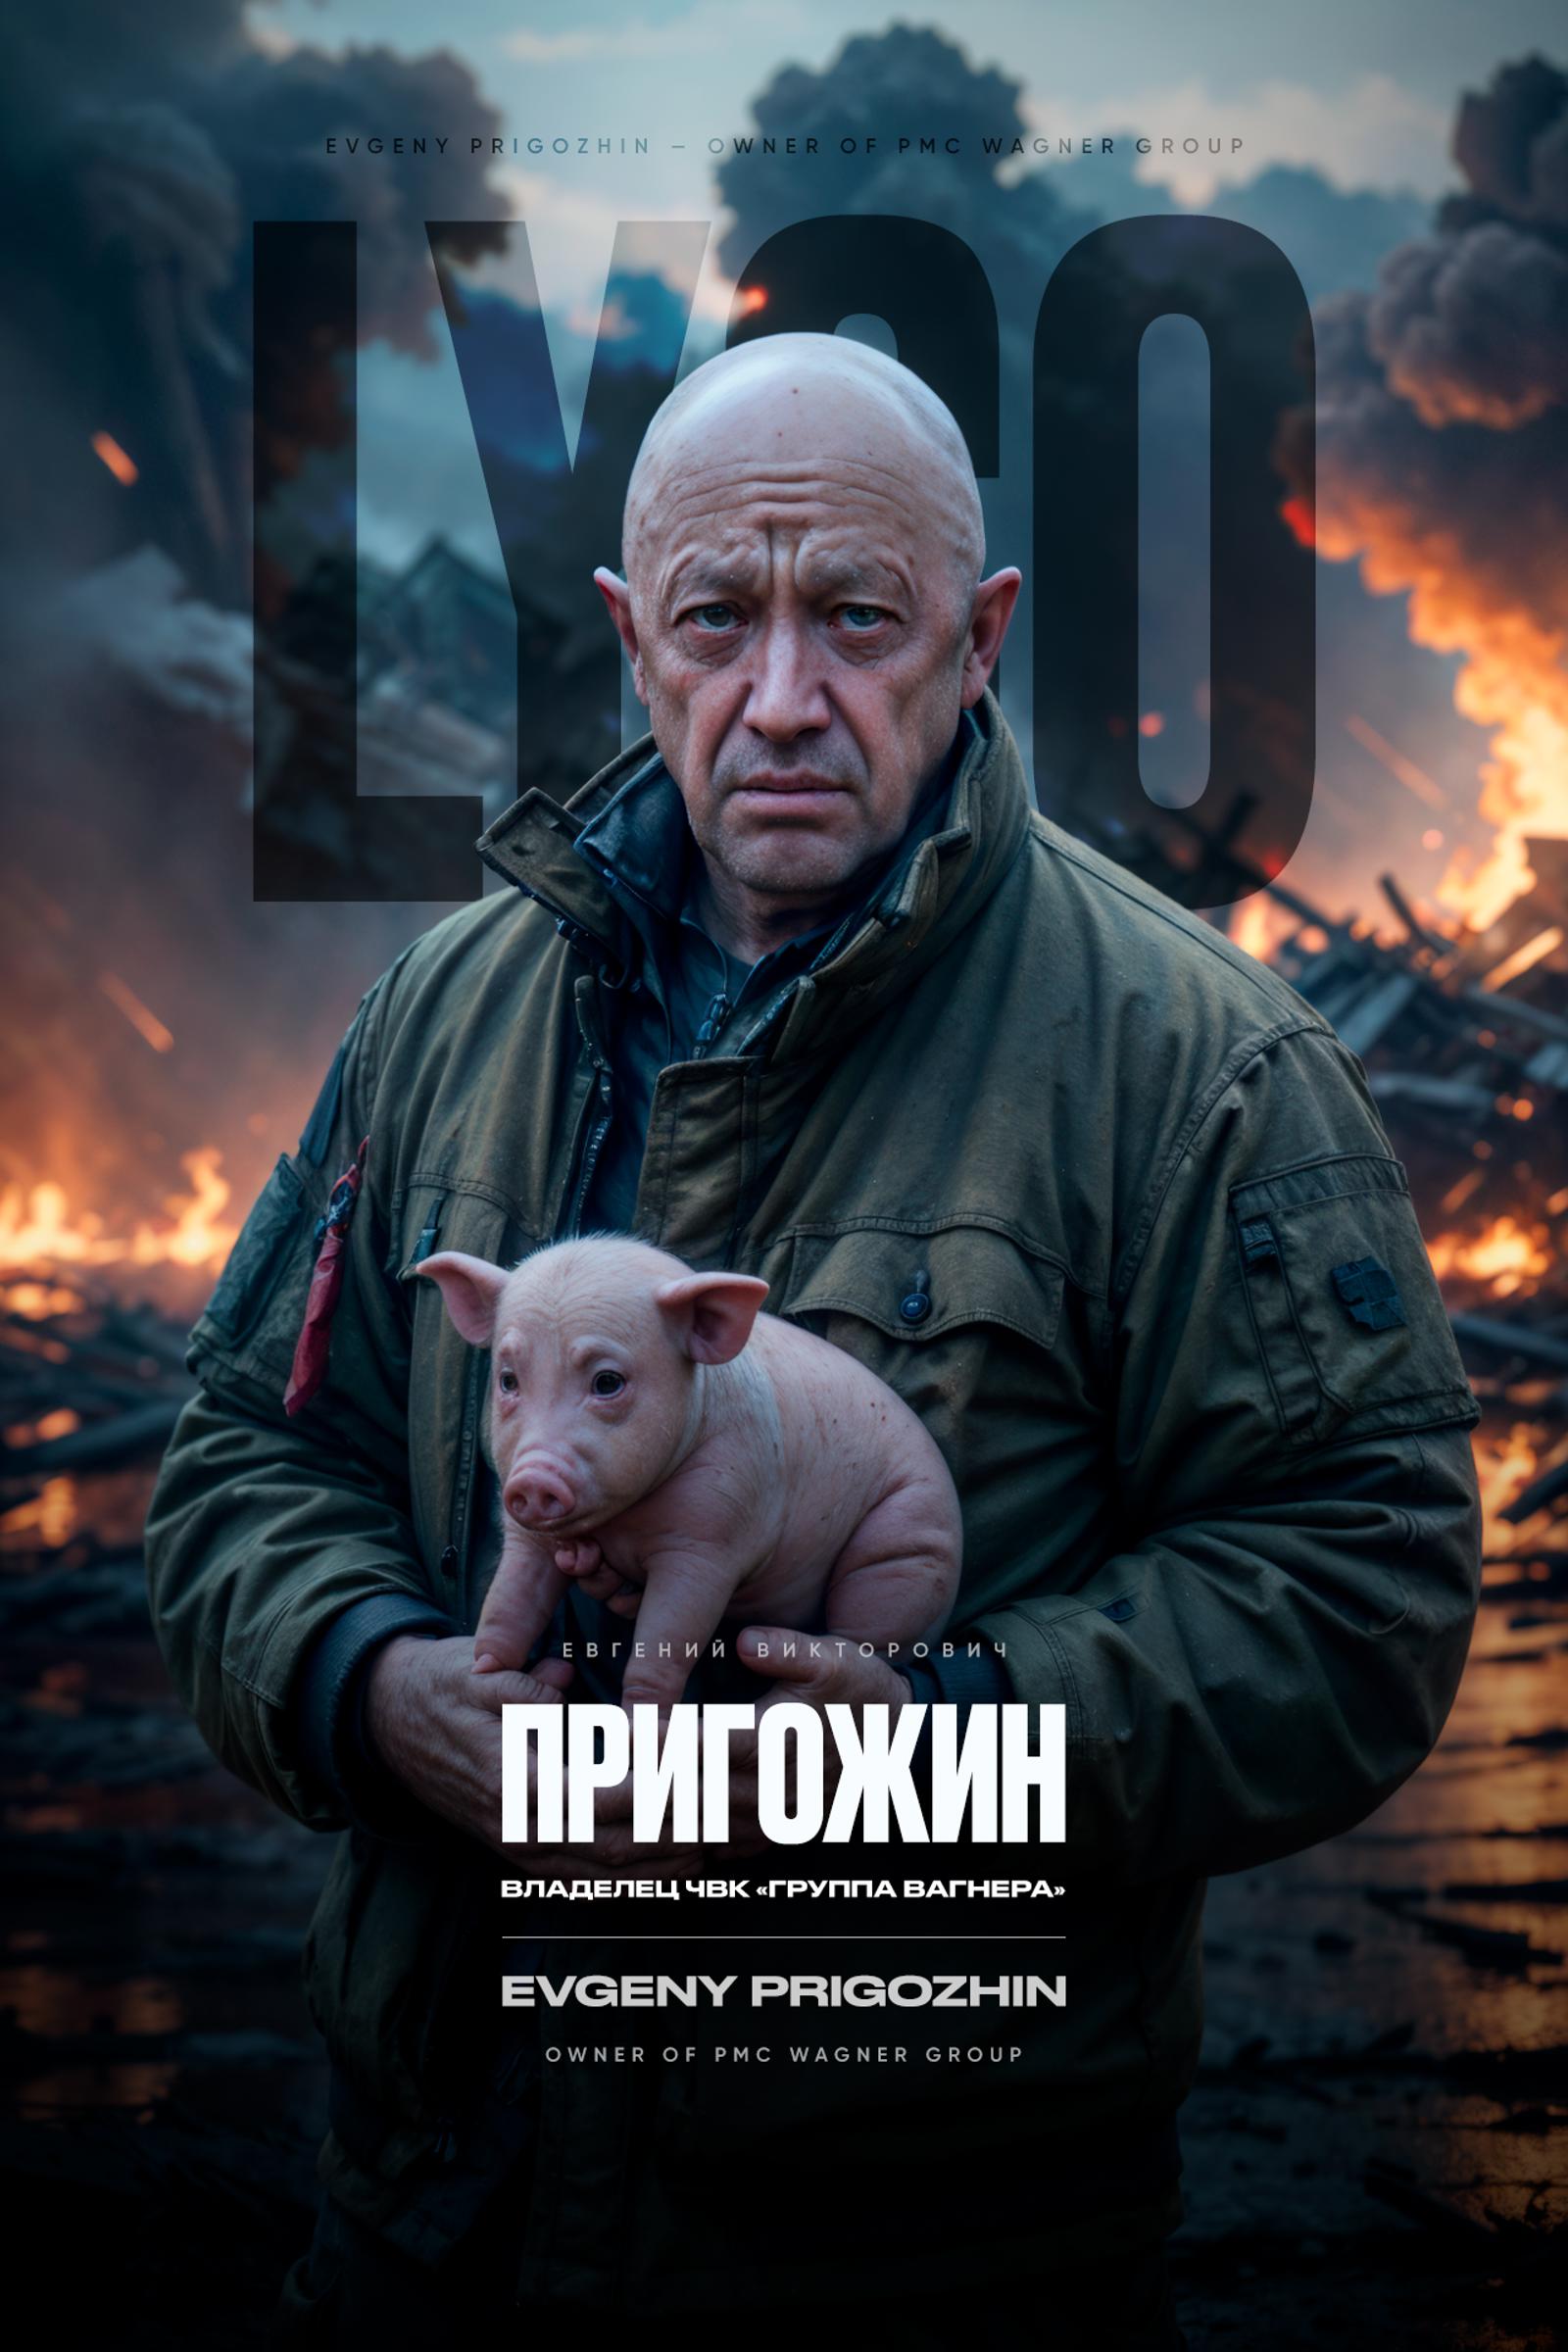 A bald man in a jacket holding a small pig in his arms.